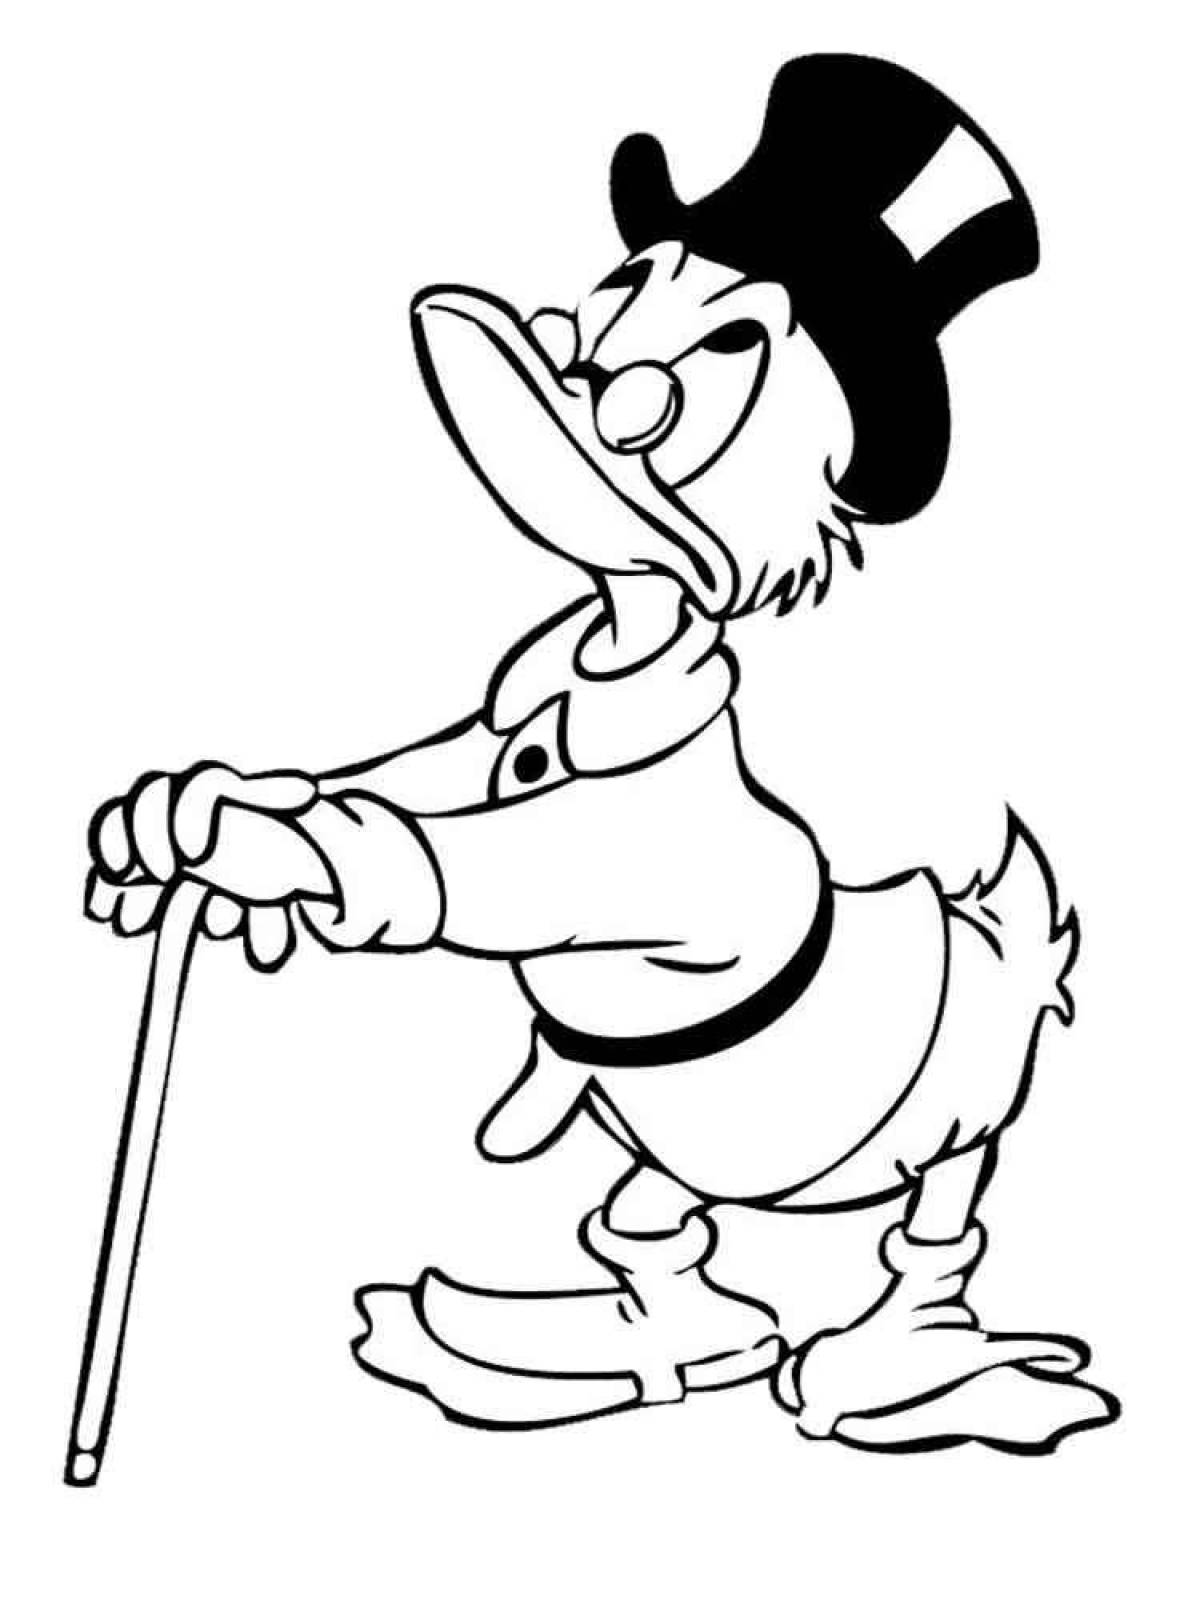 Colorful scrooge mcduck coloring page